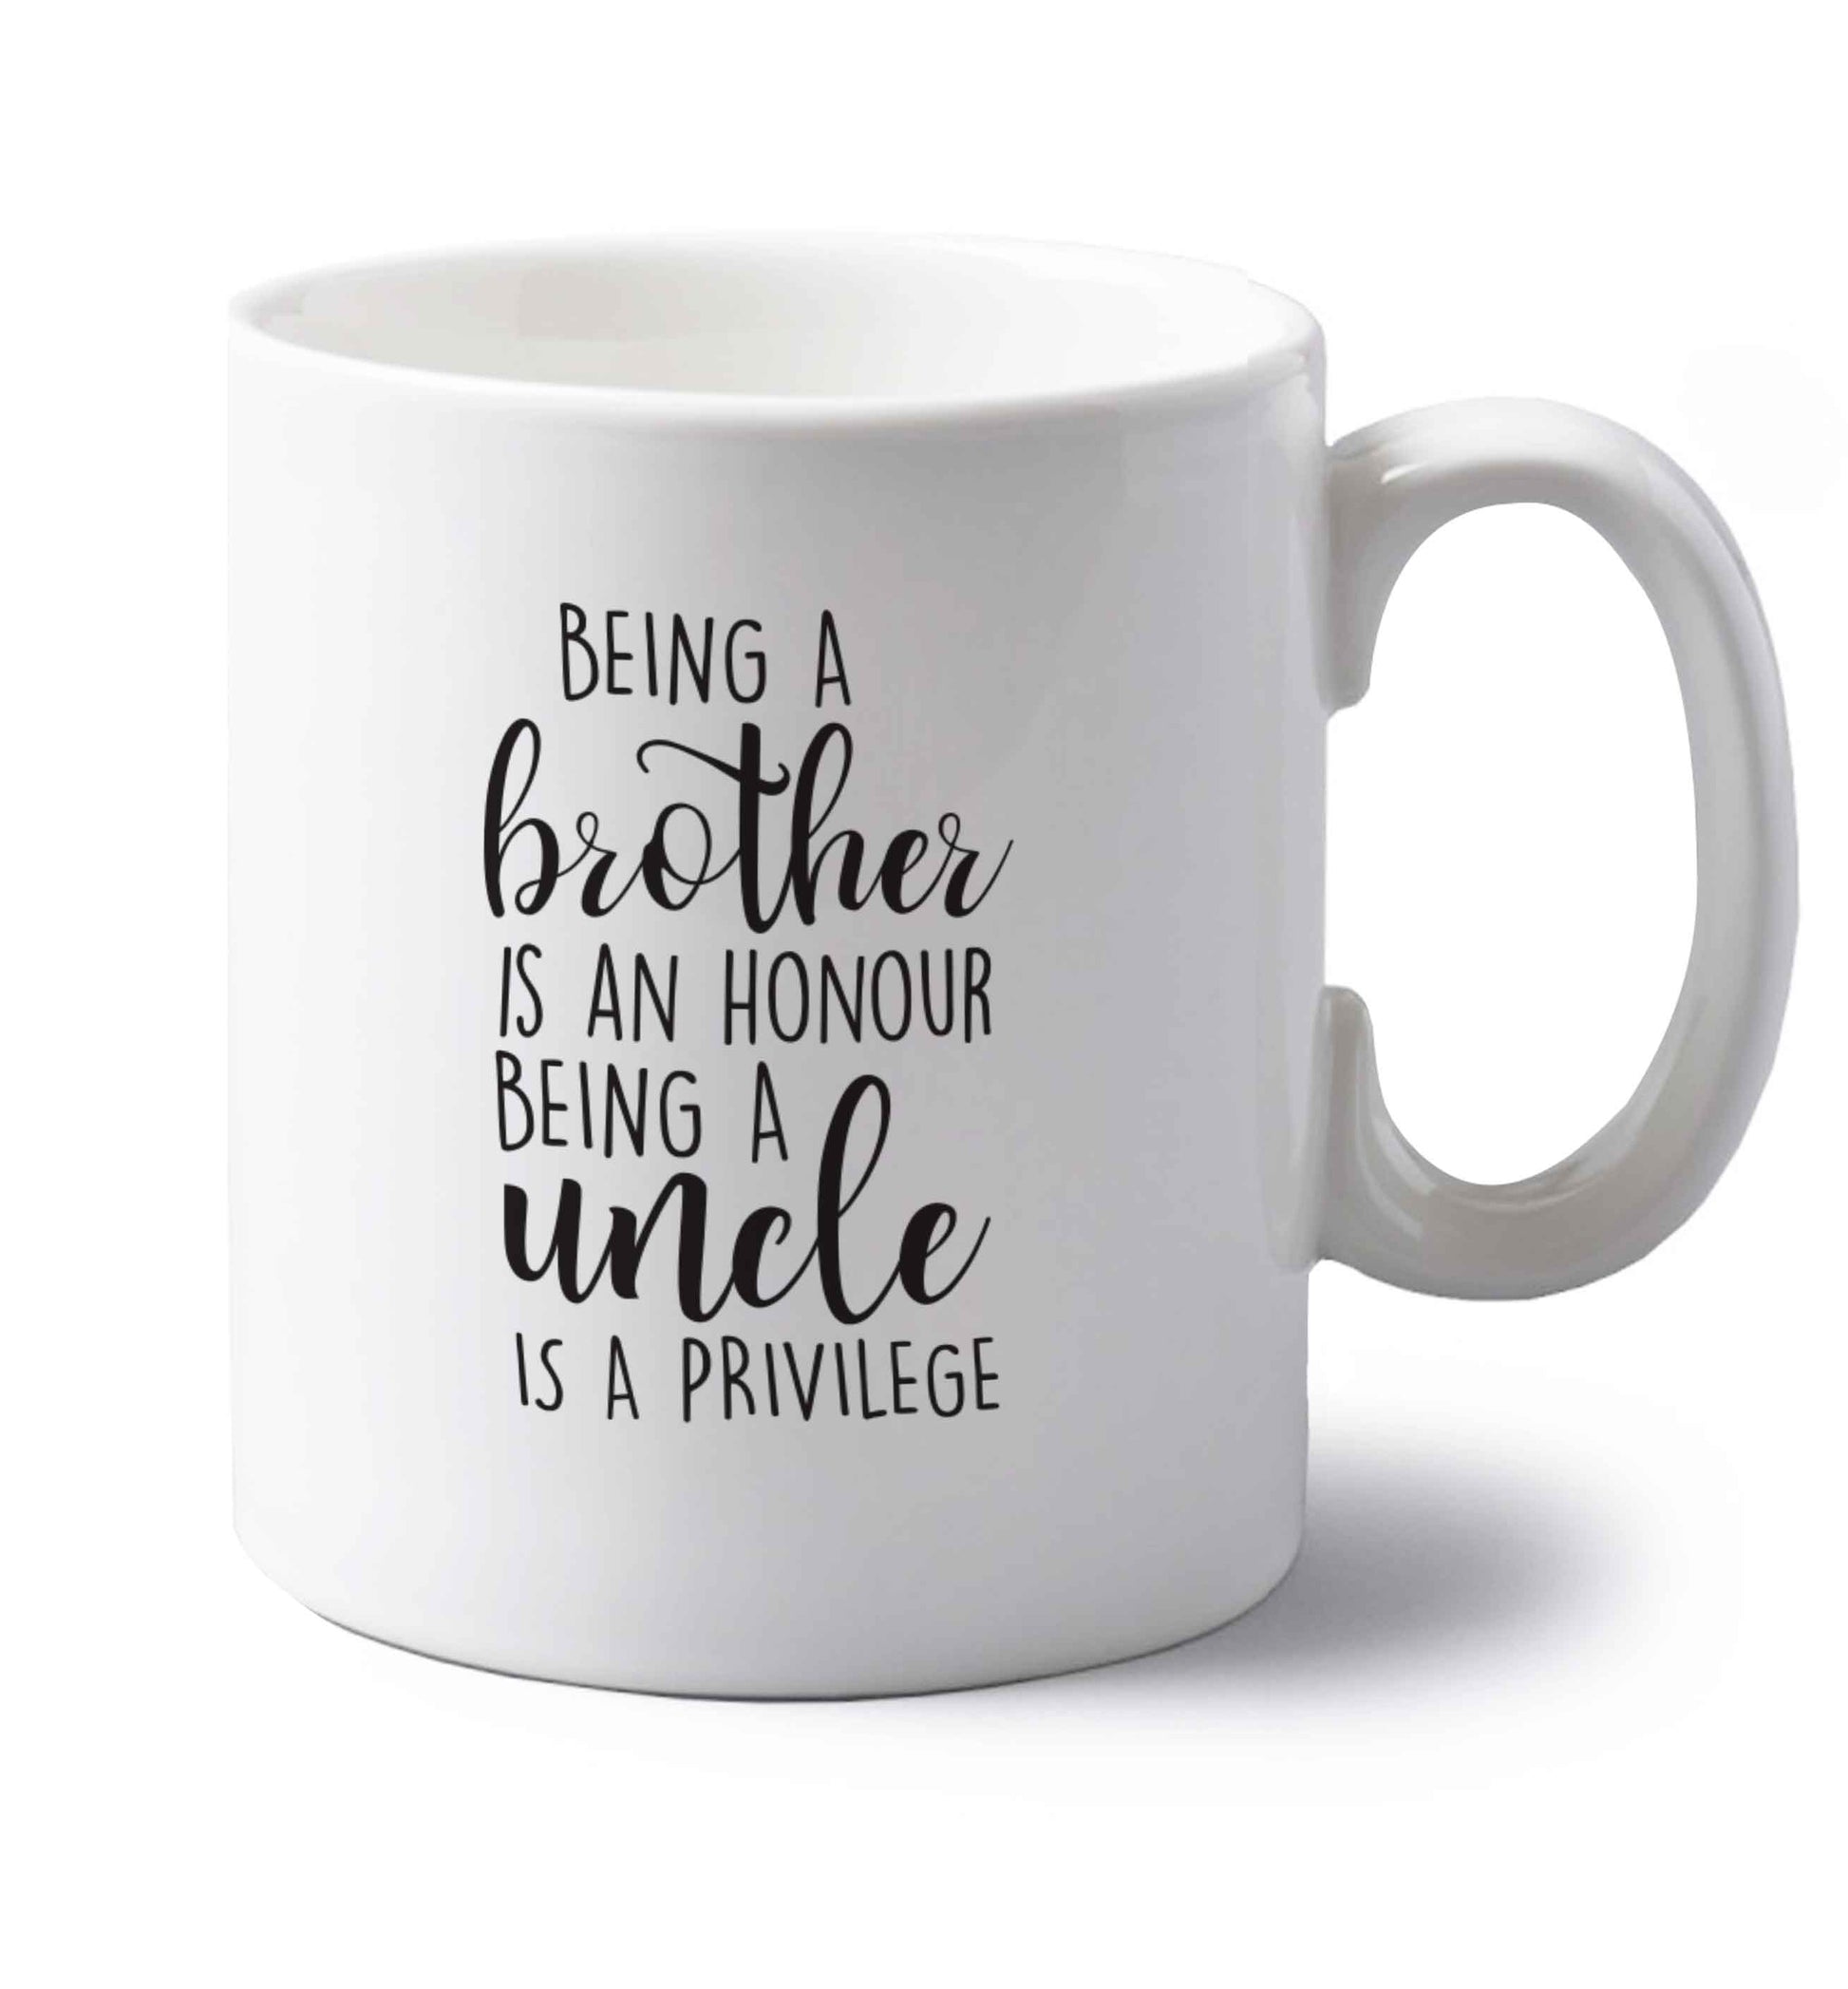 Being a brother is an honour being an uncle is a privilege left handed white ceramic mug 